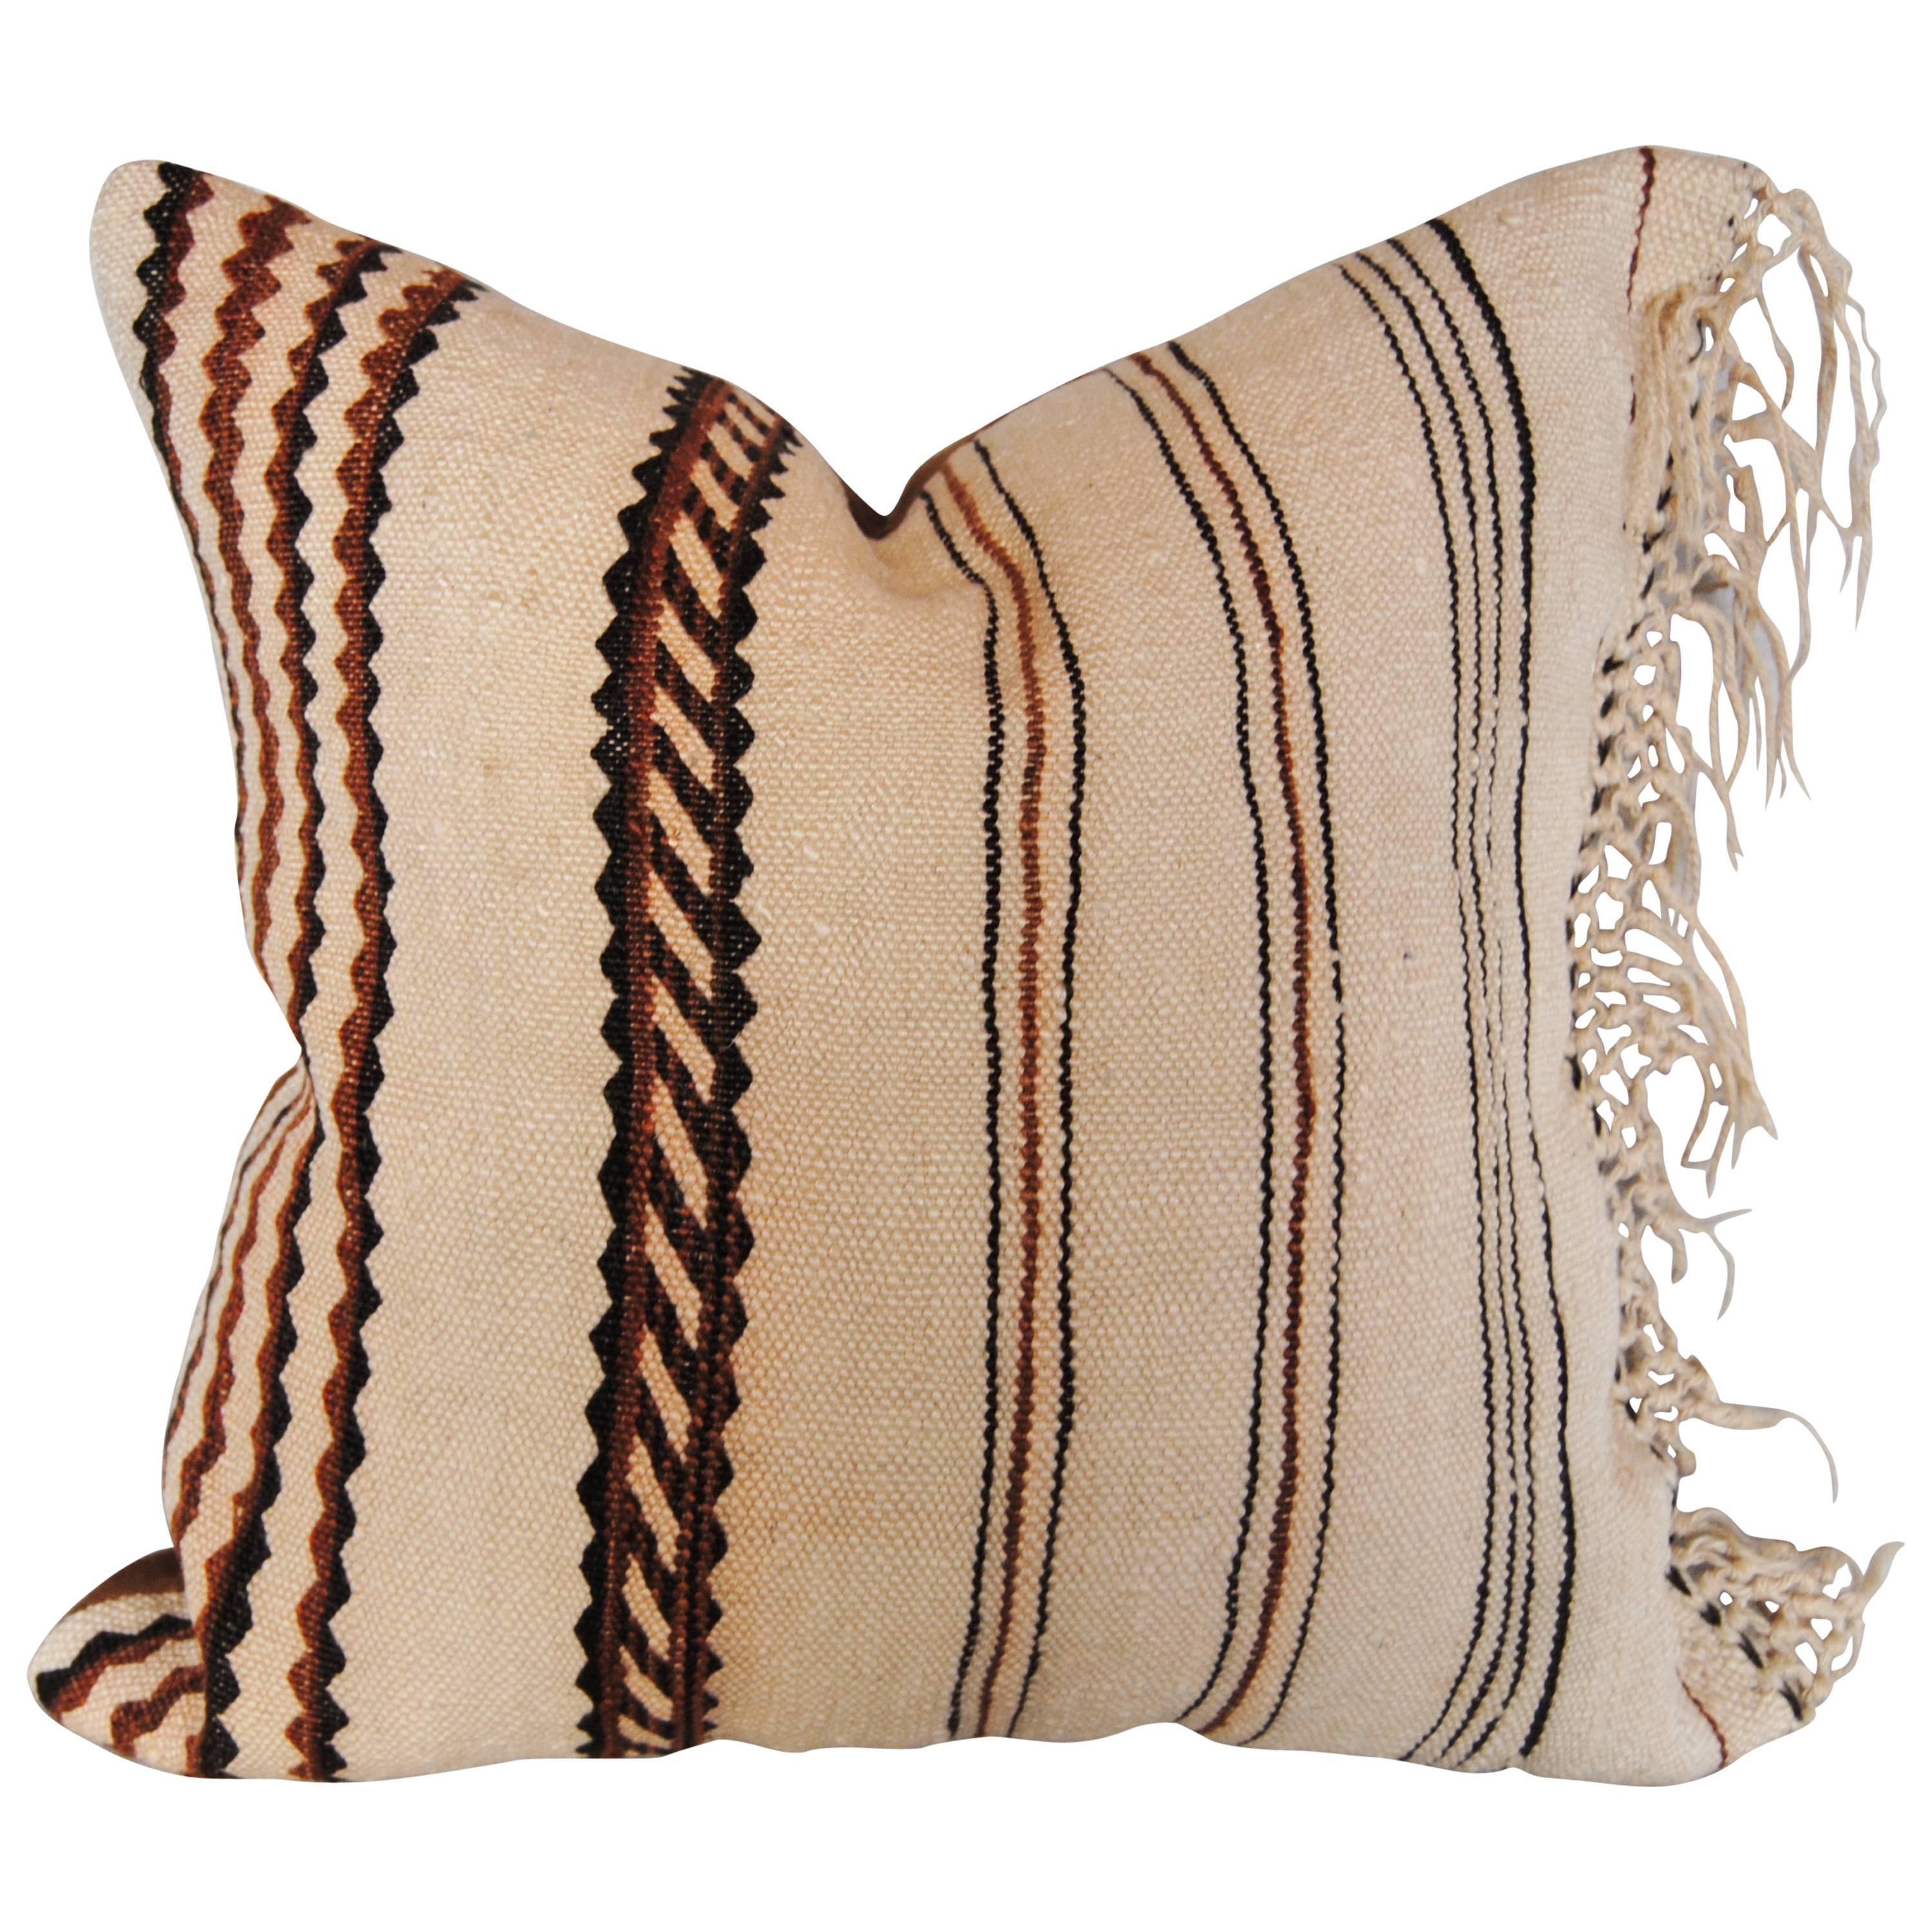 Custom Pillow Cut from a Vintage Moroccan Berber Rug from the Atlas Mountains